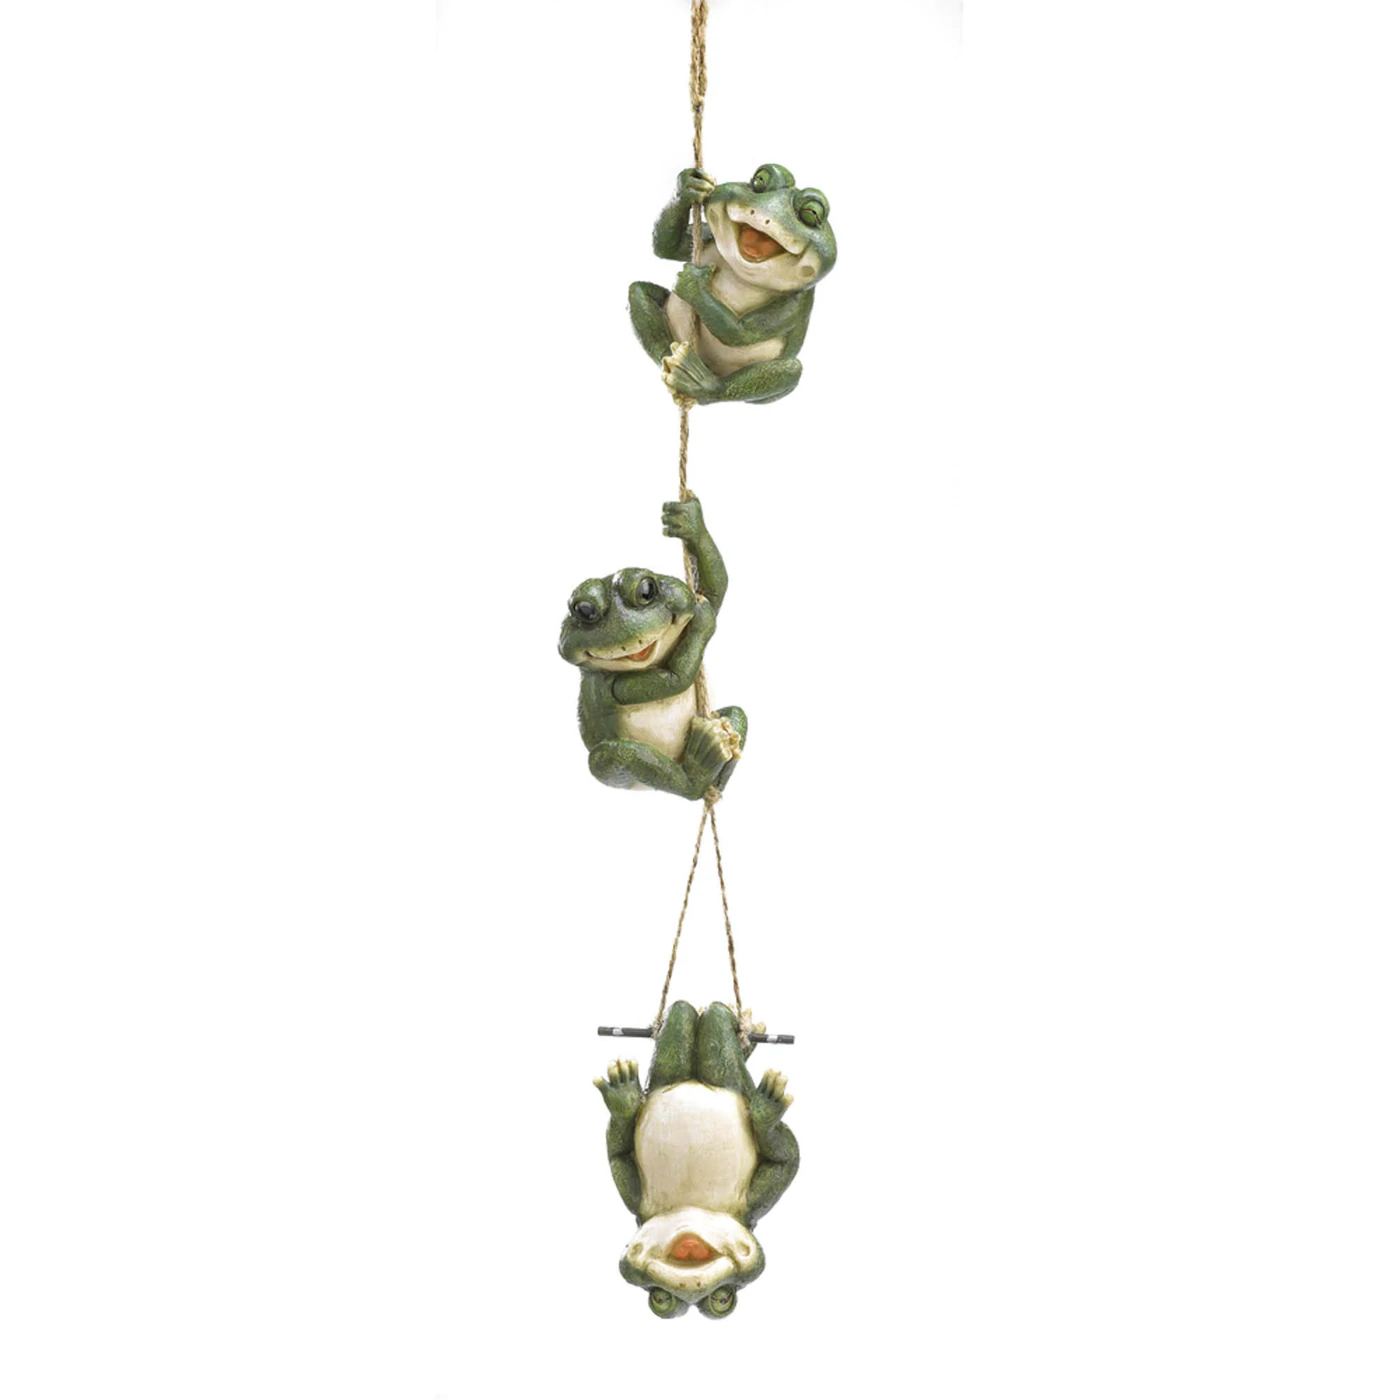 Frolicking Frogs Hanging Decoration - $28.80